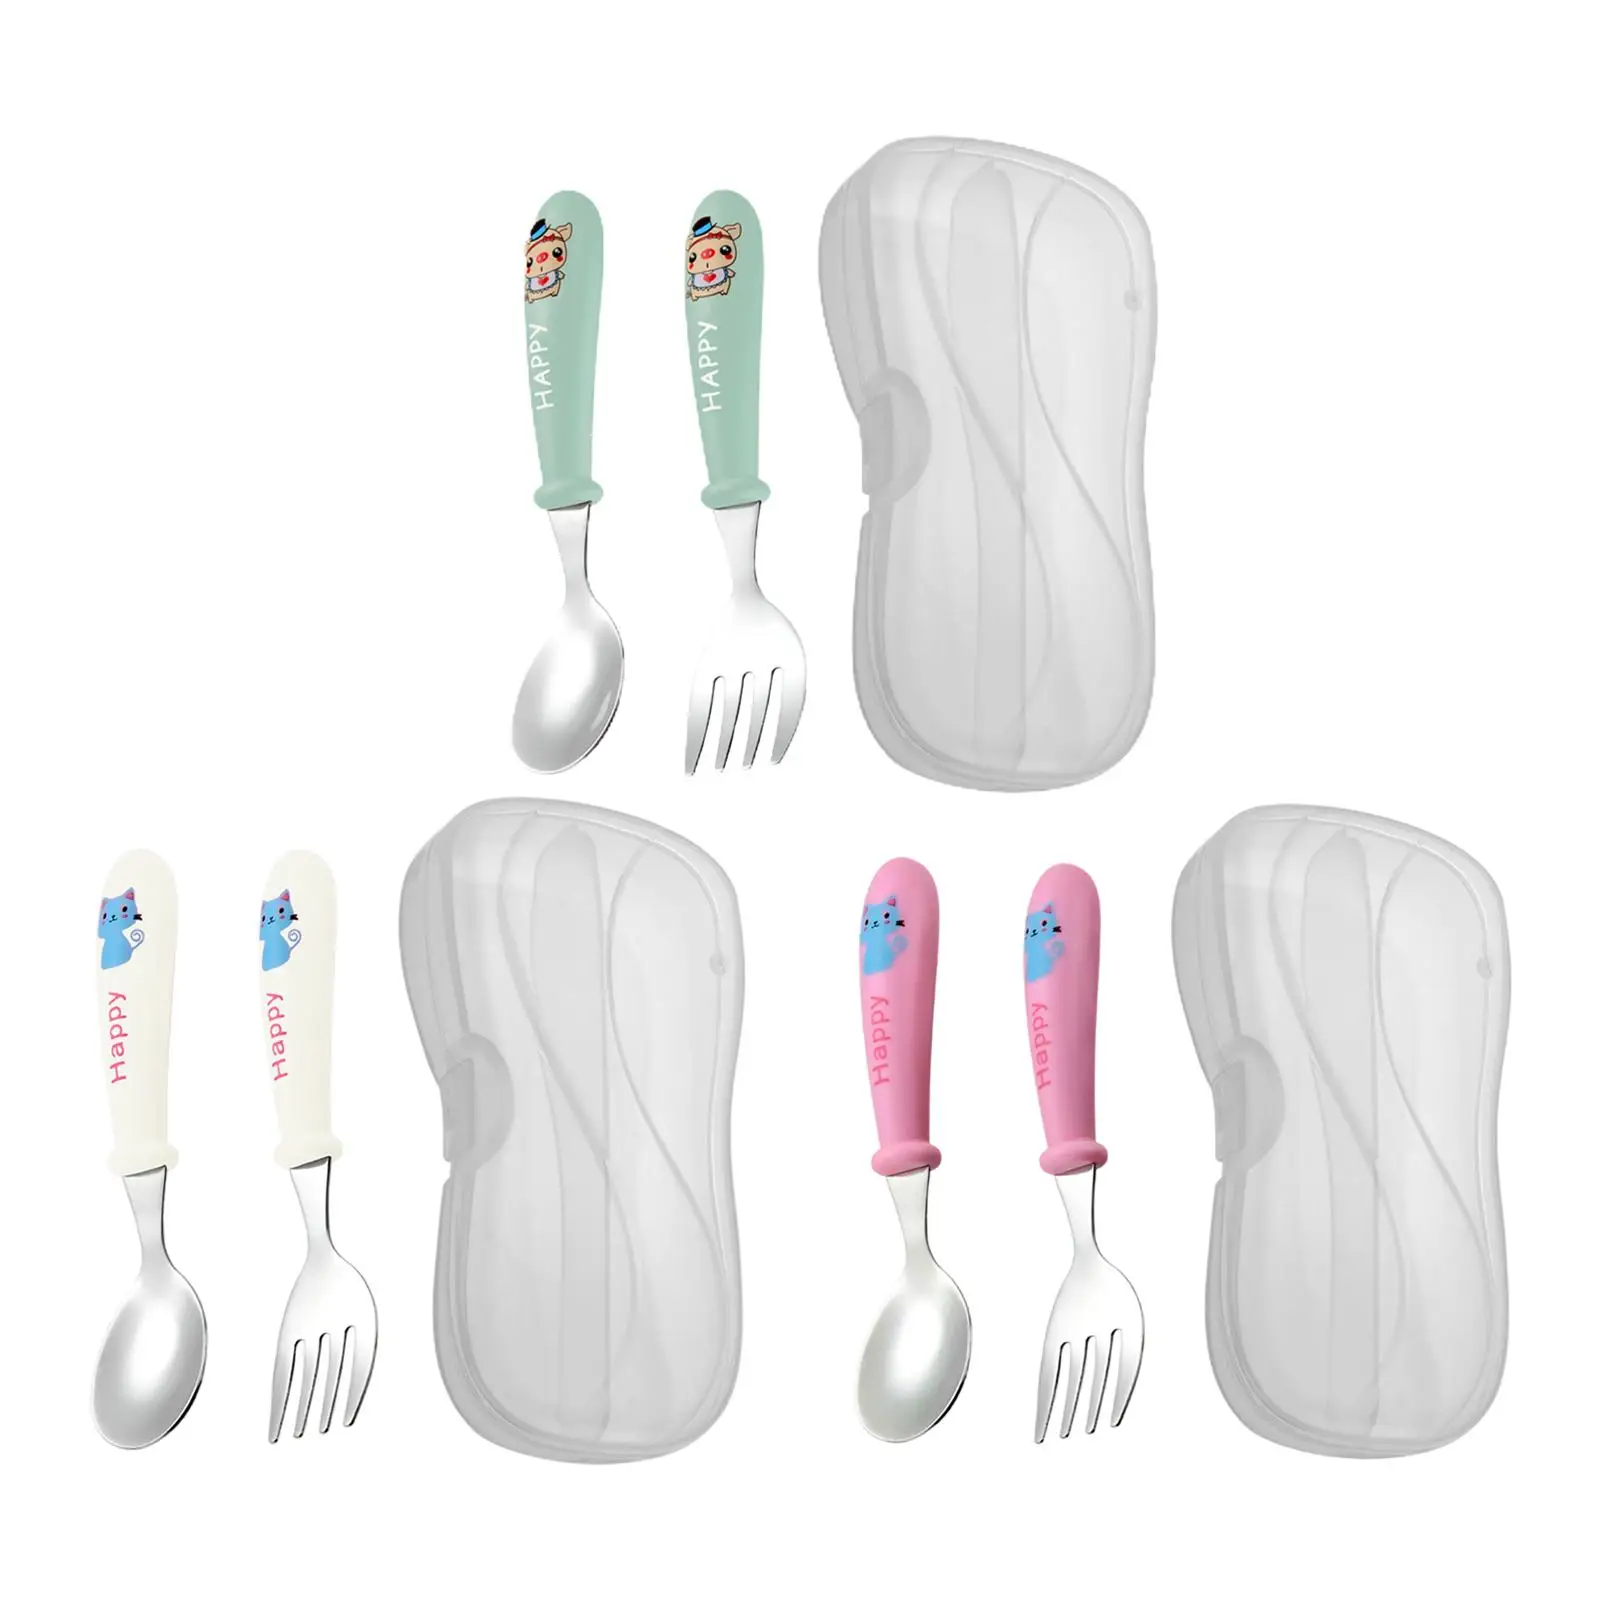 Stainless Steel Spoon Fork Set with Box Dinnerware 2 Pieces Kids Tableware for Travel Baby